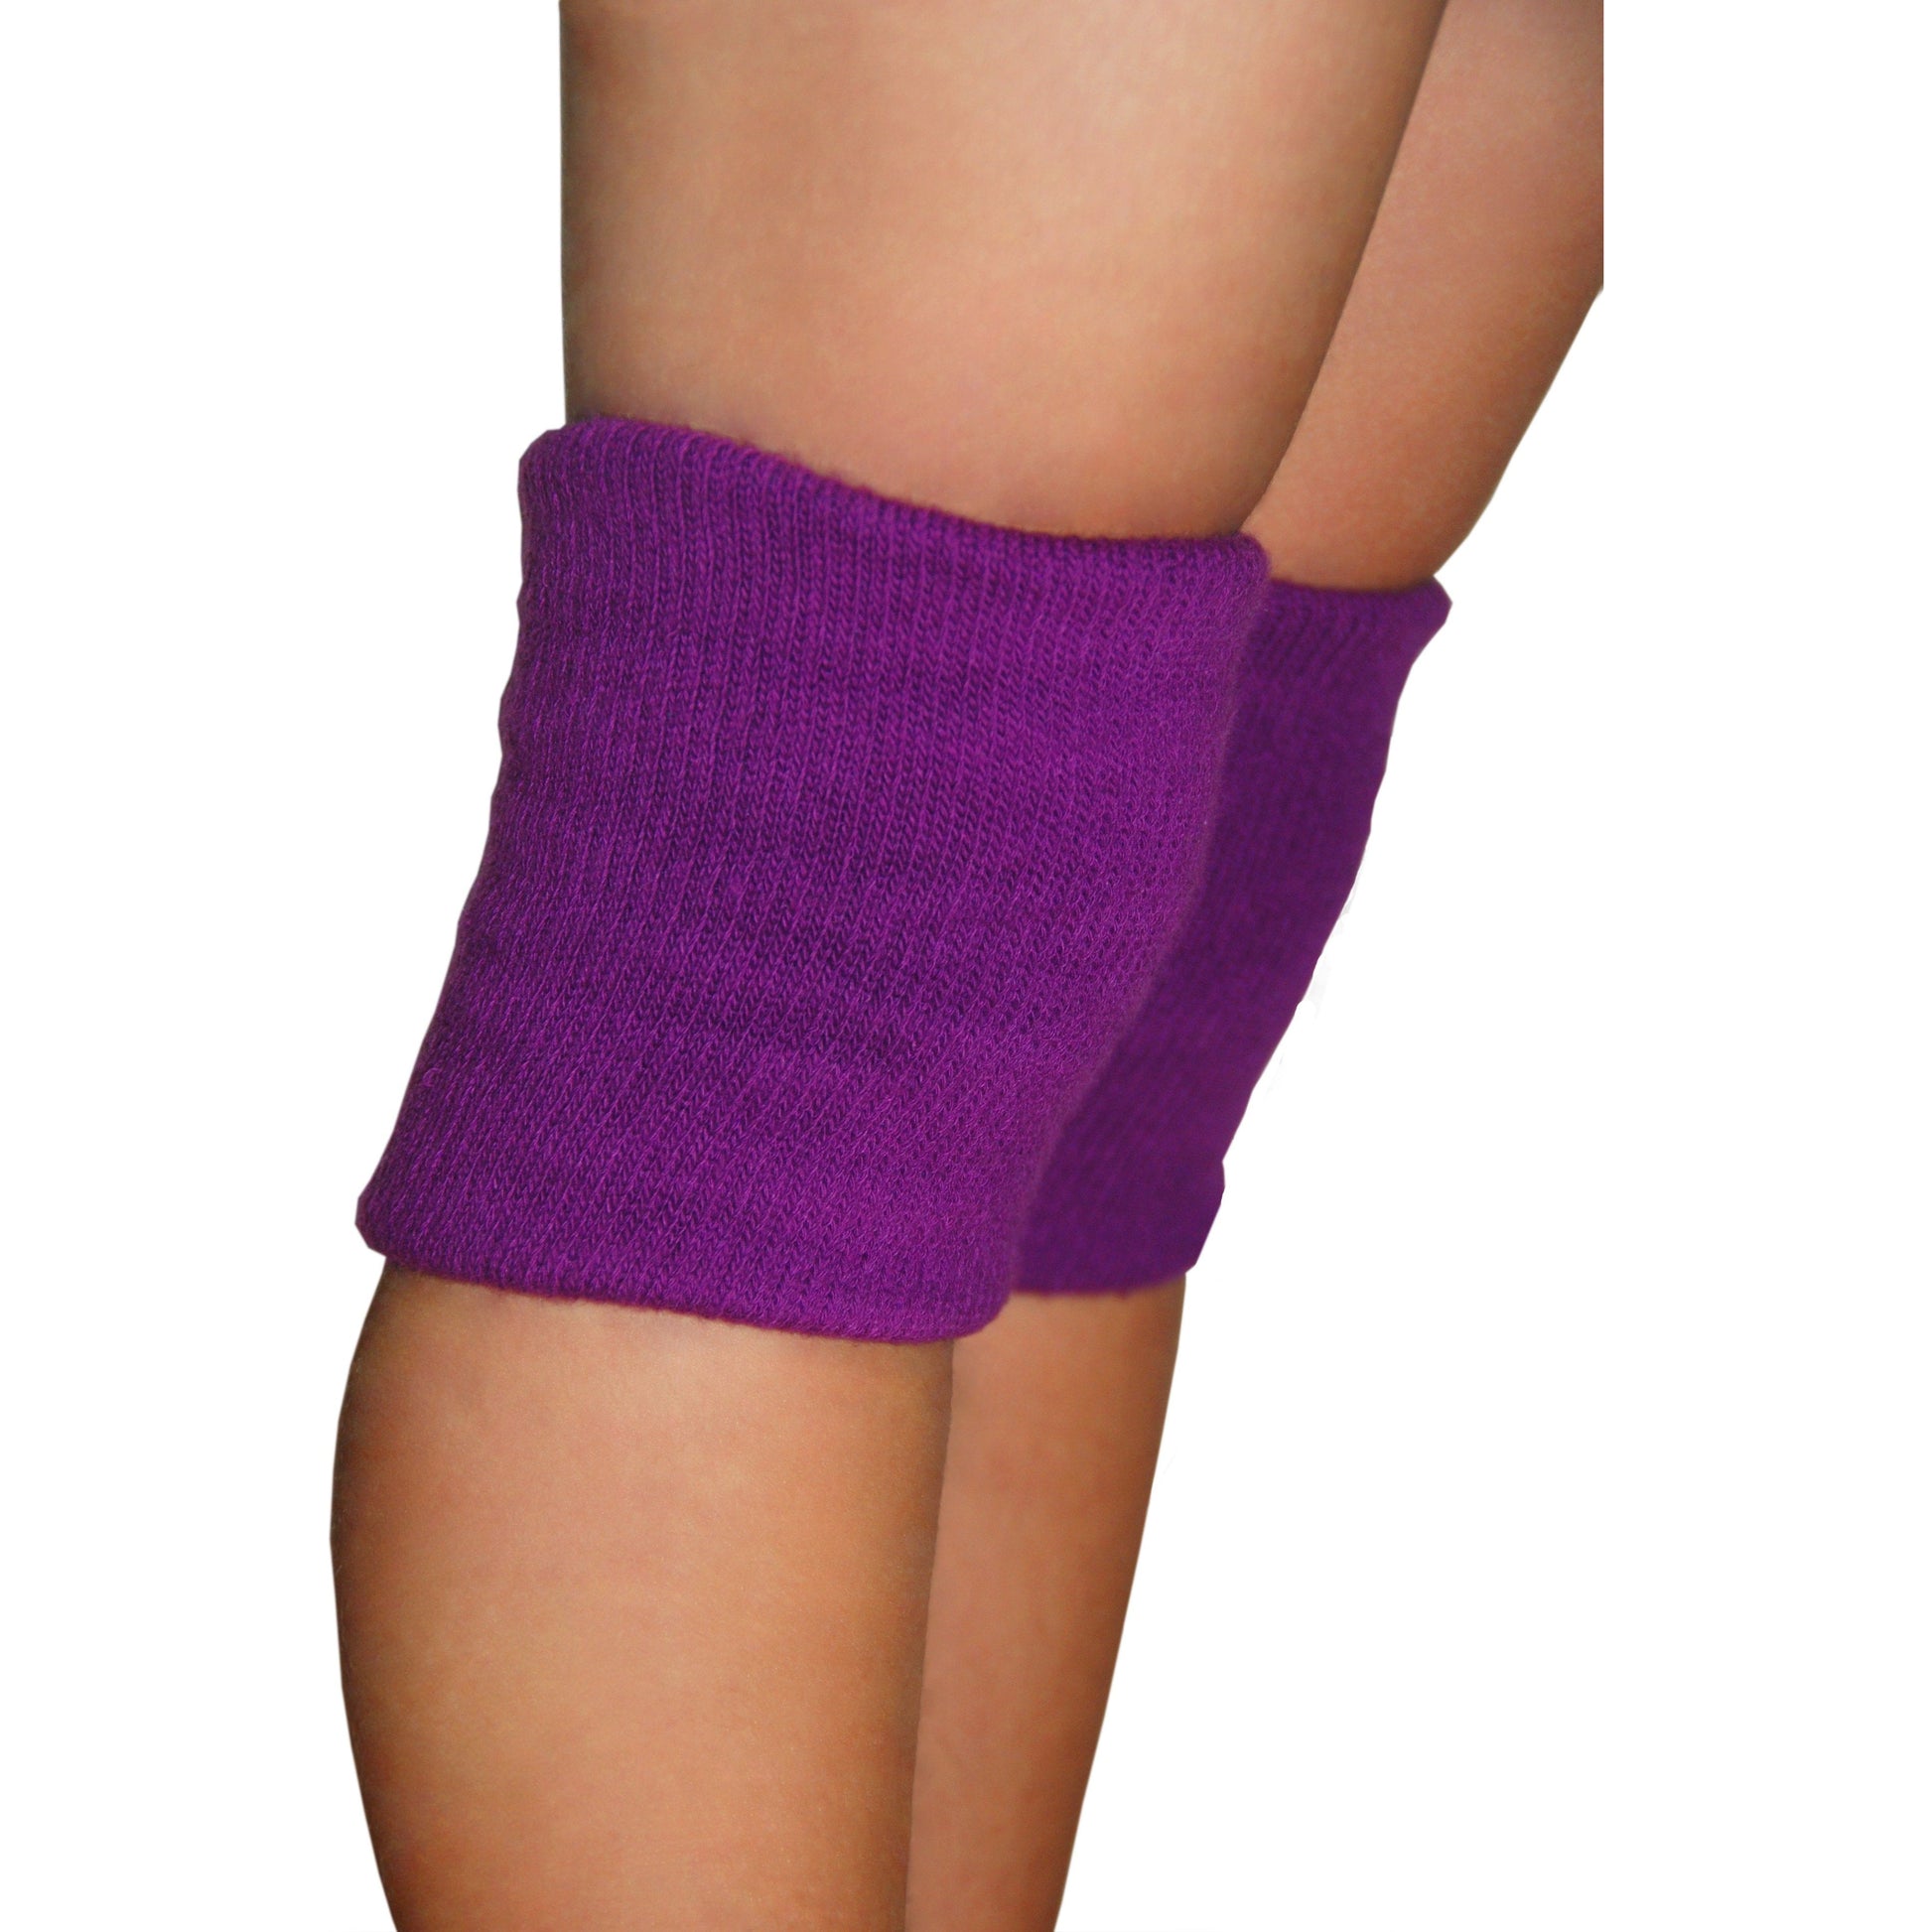 Soft Knee Pads / Knee Protectors. For Older Kids / Children. More Colors Available-Knee Pads-KneeBees